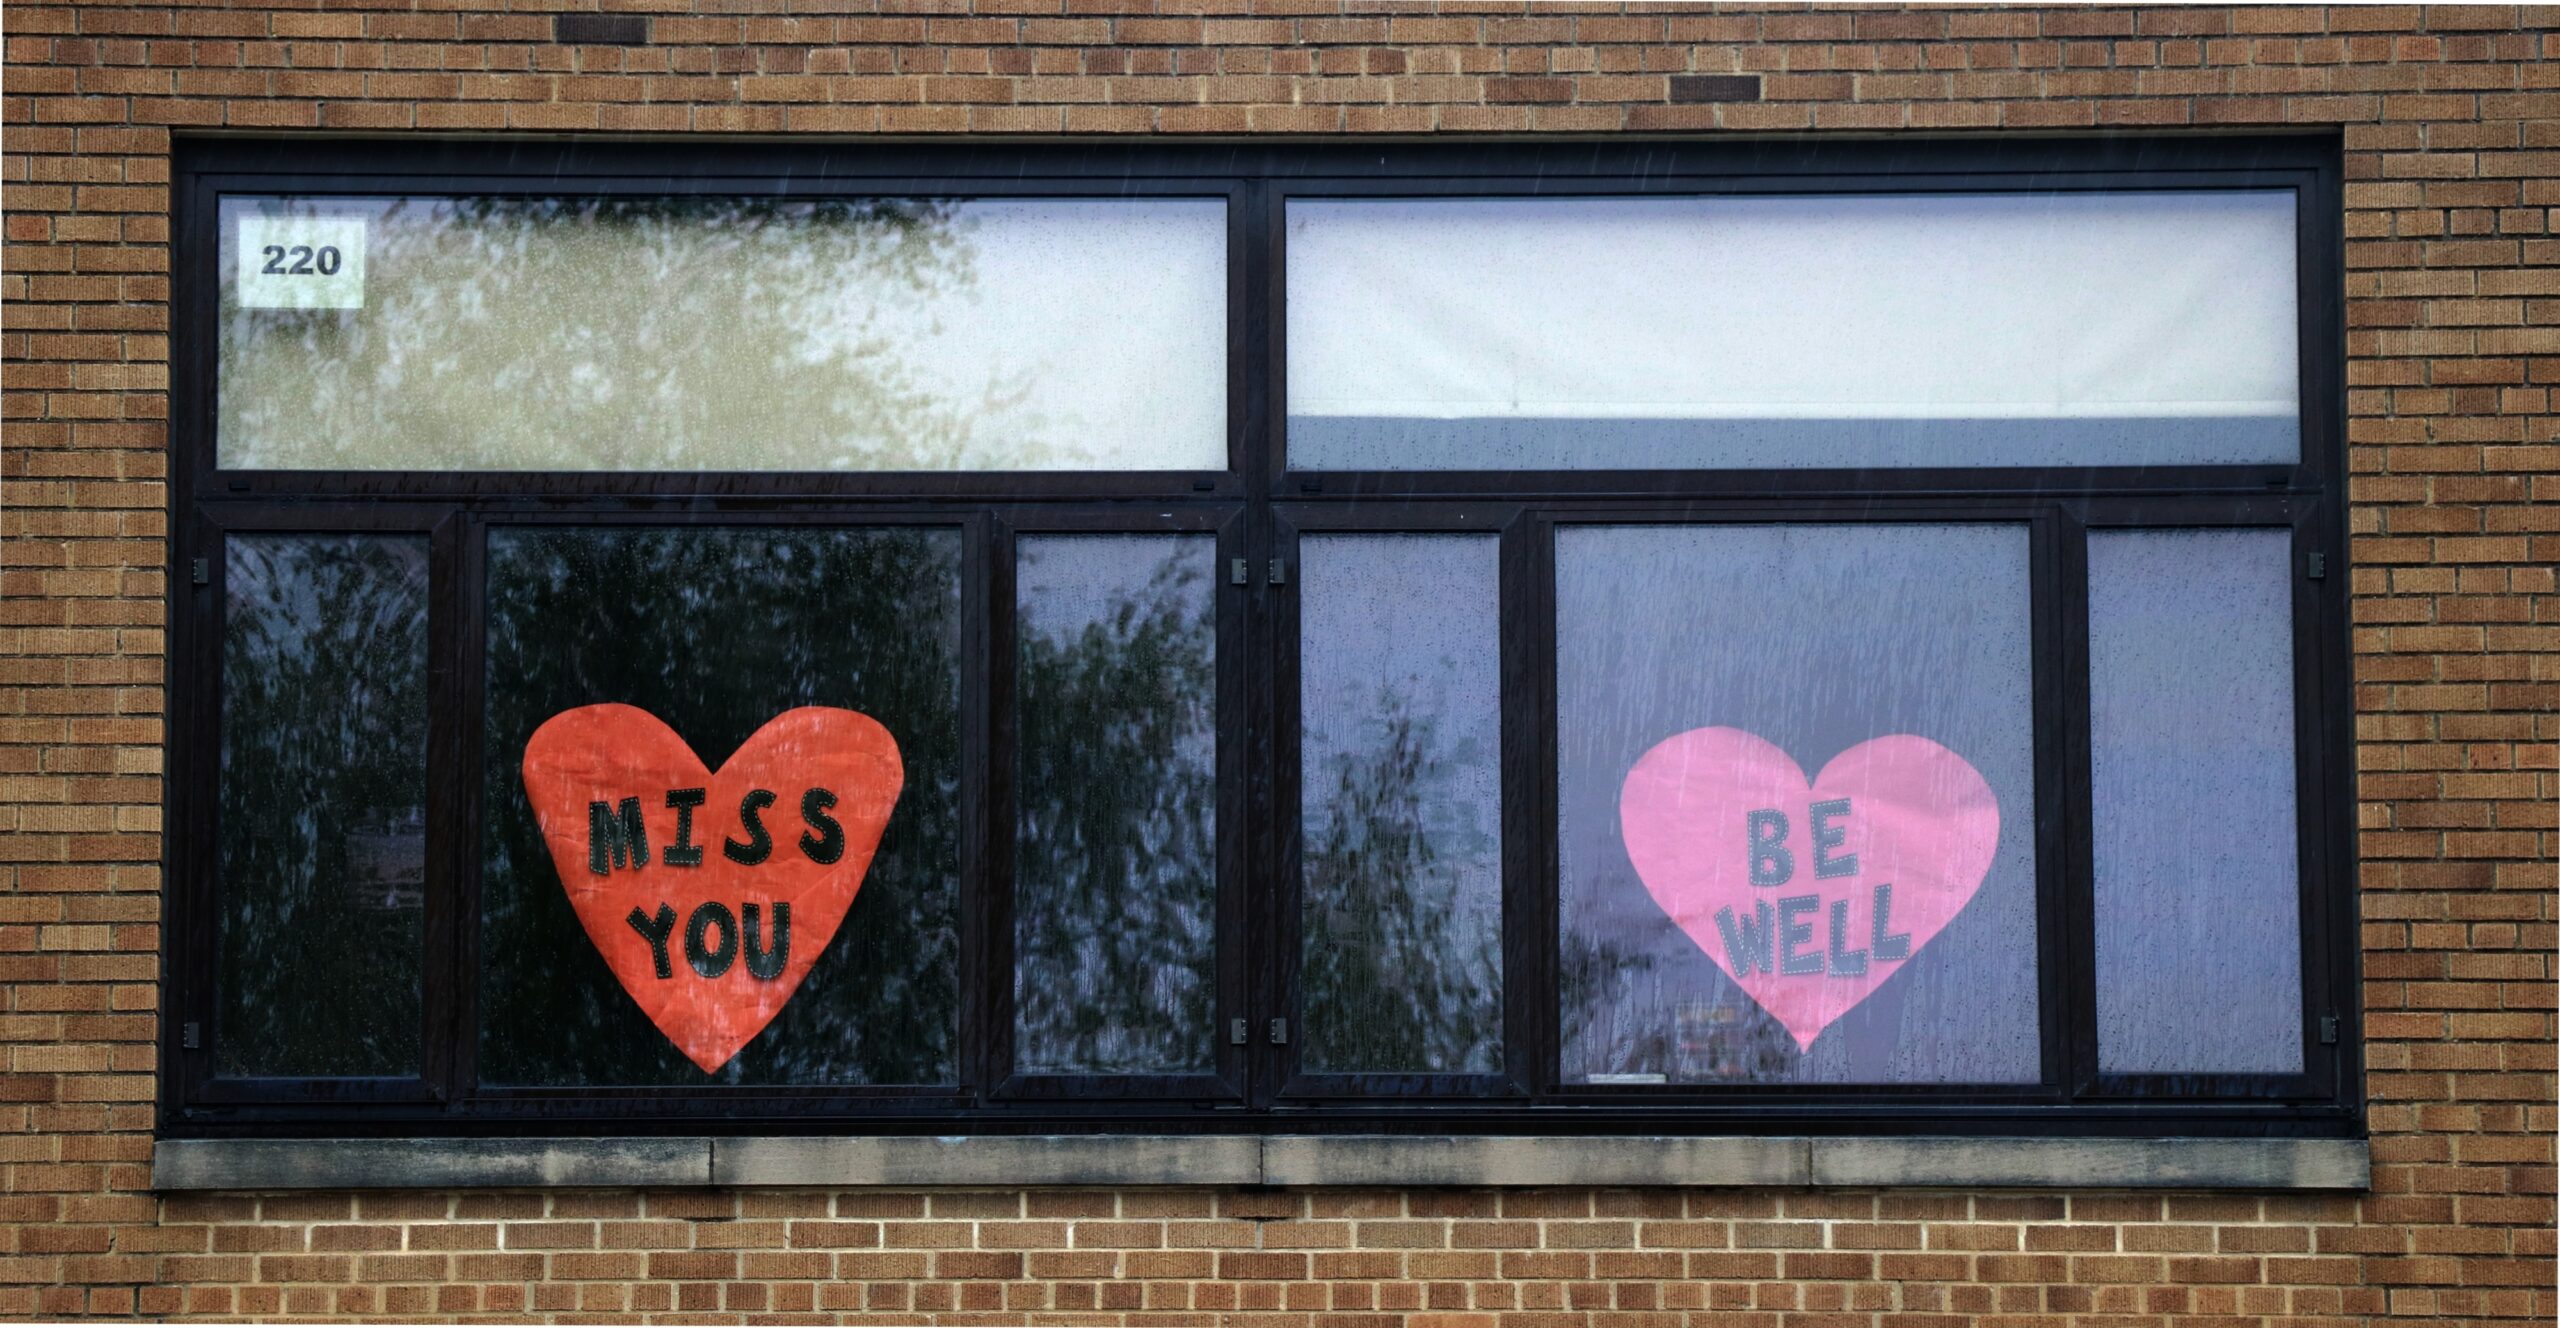 Signs of encouragement in windows of a Madison school